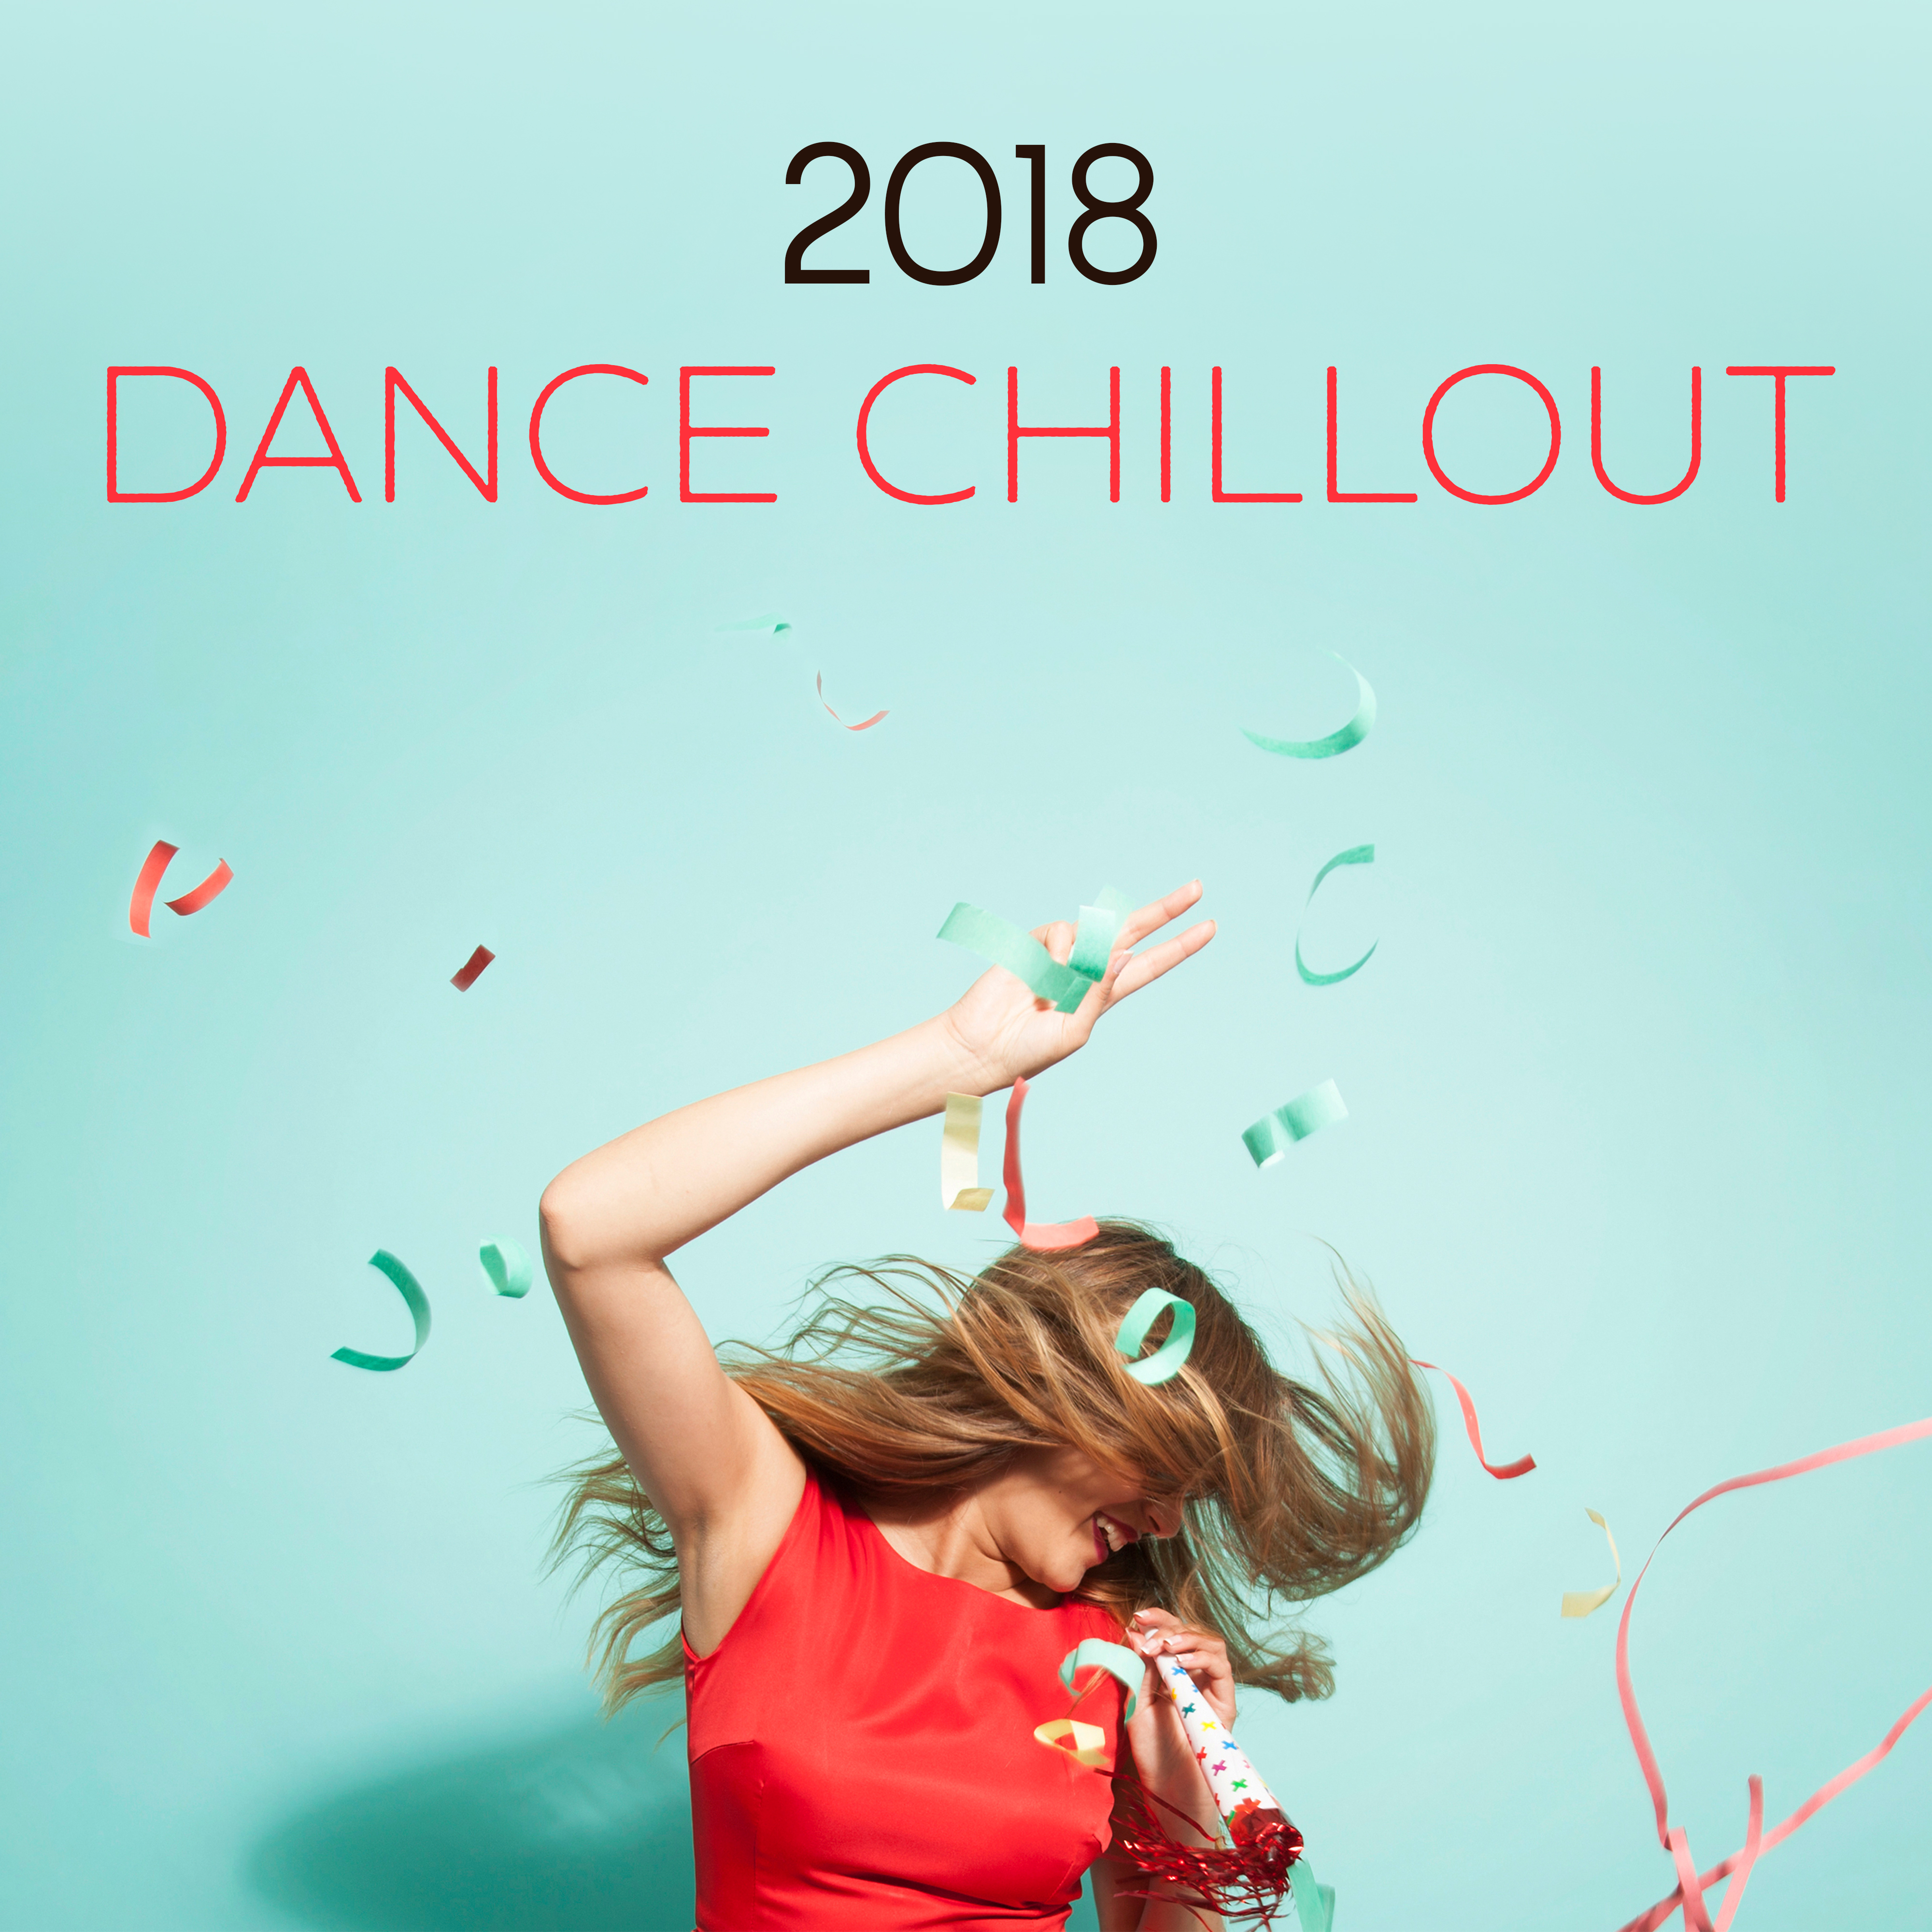 Dance Chillout 2018